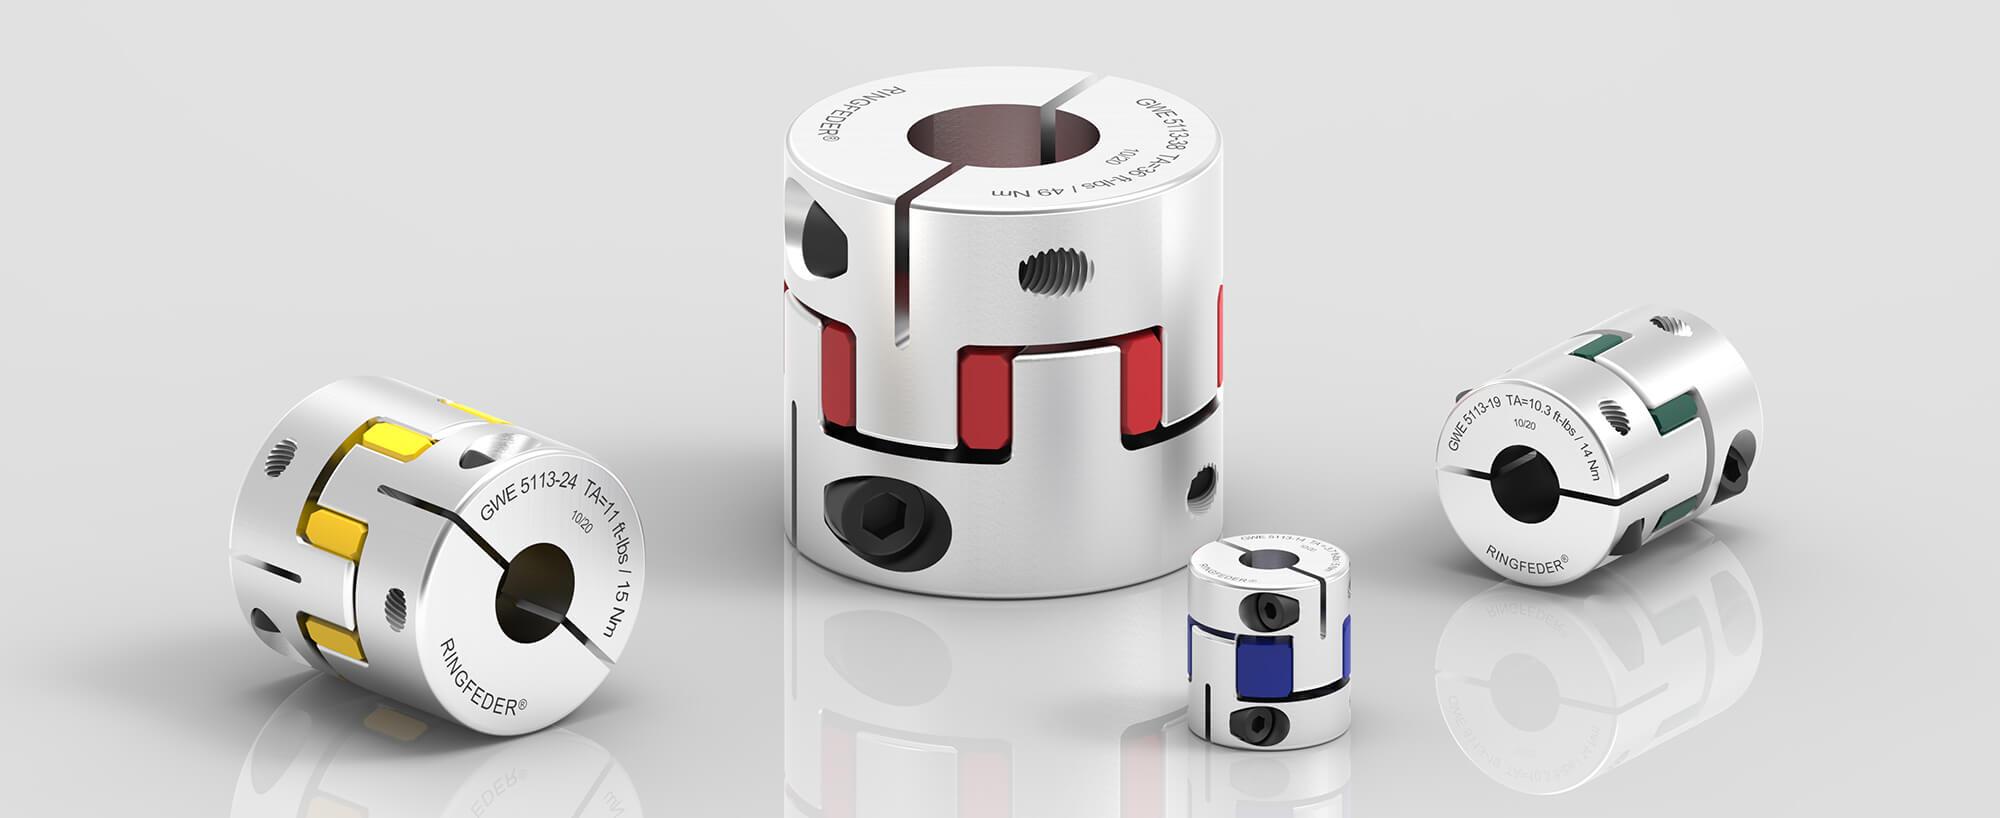 Elastomer Jaw Couplings GWE 5113: The Solution for an Ideal Vibration- and Shock-Damped, Uniform Drive Force Transmission in Precision Applications | RINGFEDER®